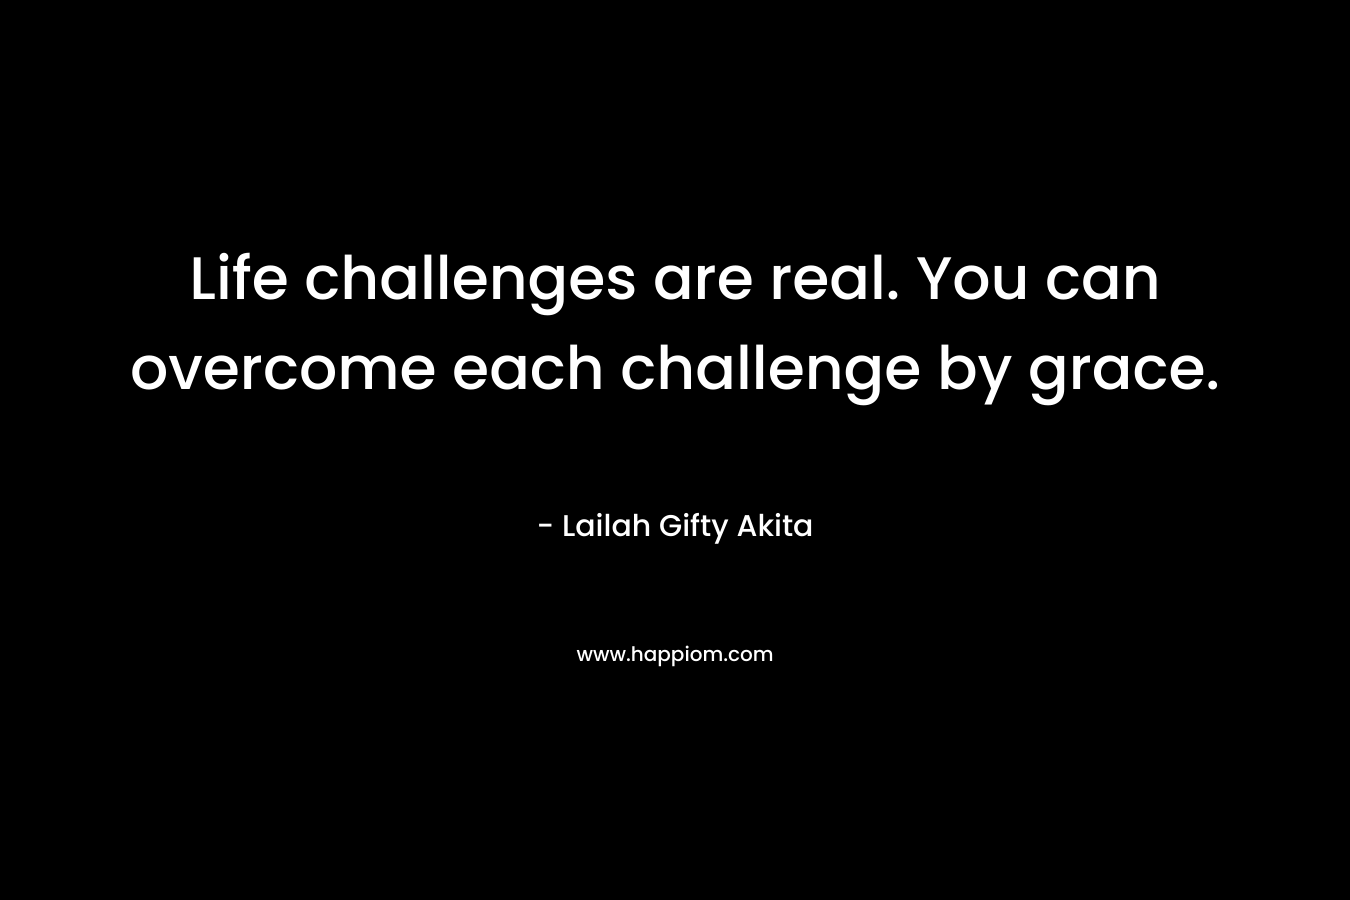 Life challenges are real. You can overcome each challenge by grace.